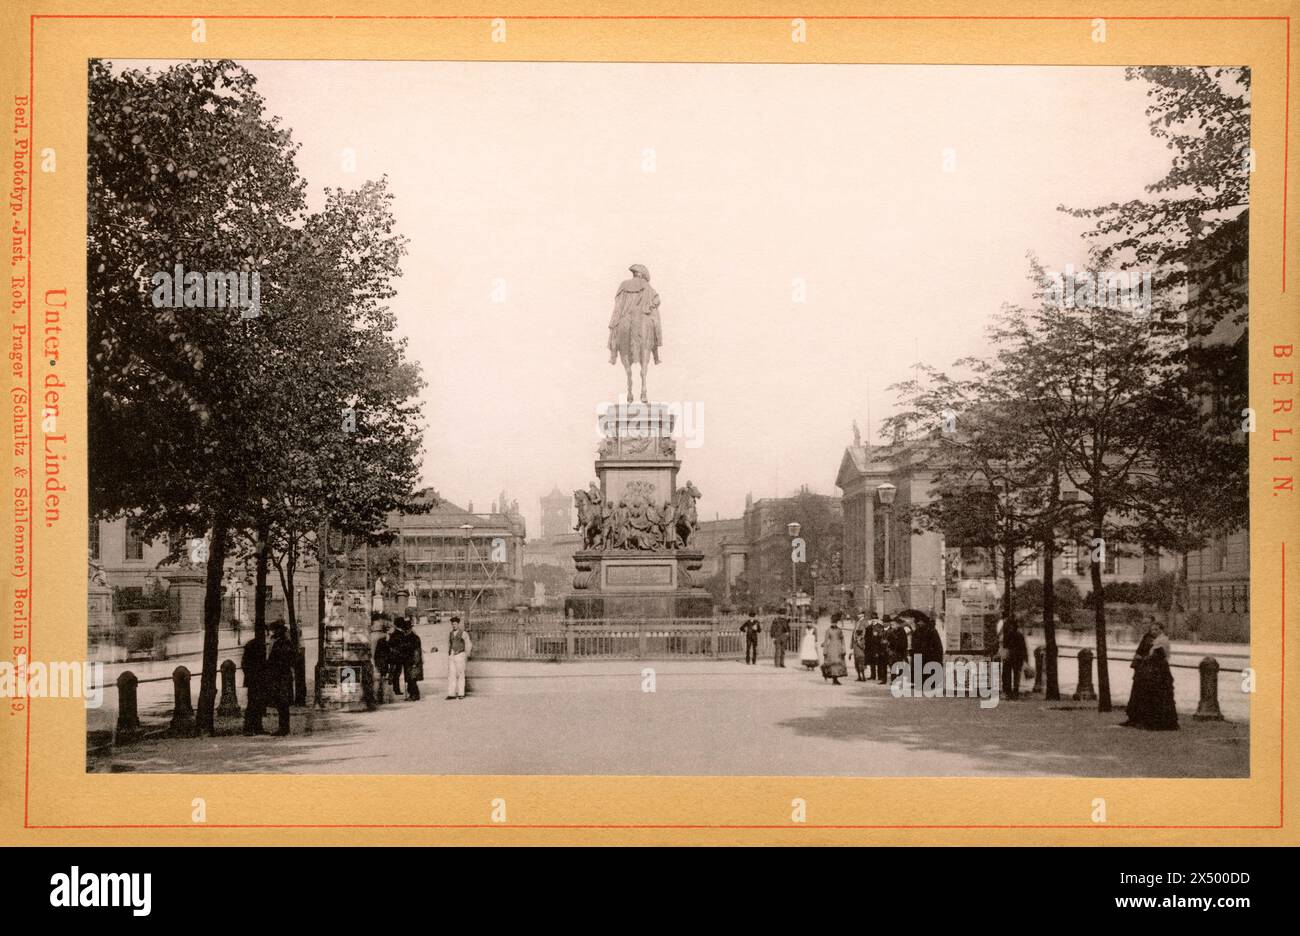 geography / travel, Germany, Berlin, Unter den Linden with the horseman statue of Frederick the Great, ARTIST'S COPYRIGHT HAS NOT TO BE CLEARED Stock Photo